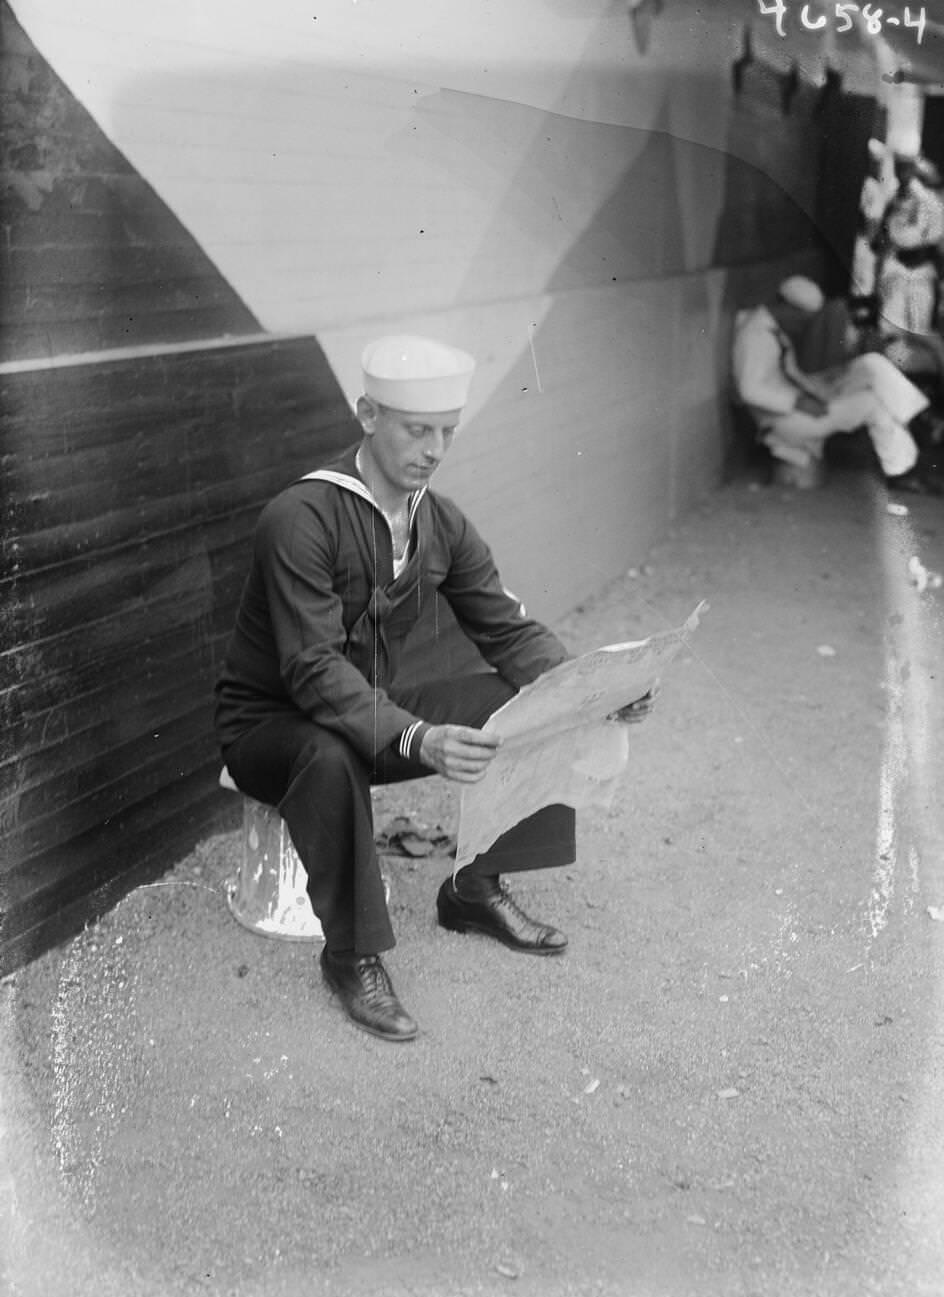 William J. Reilly, A Sergeant In The Navy And Vaudeville Performer, 1910S.